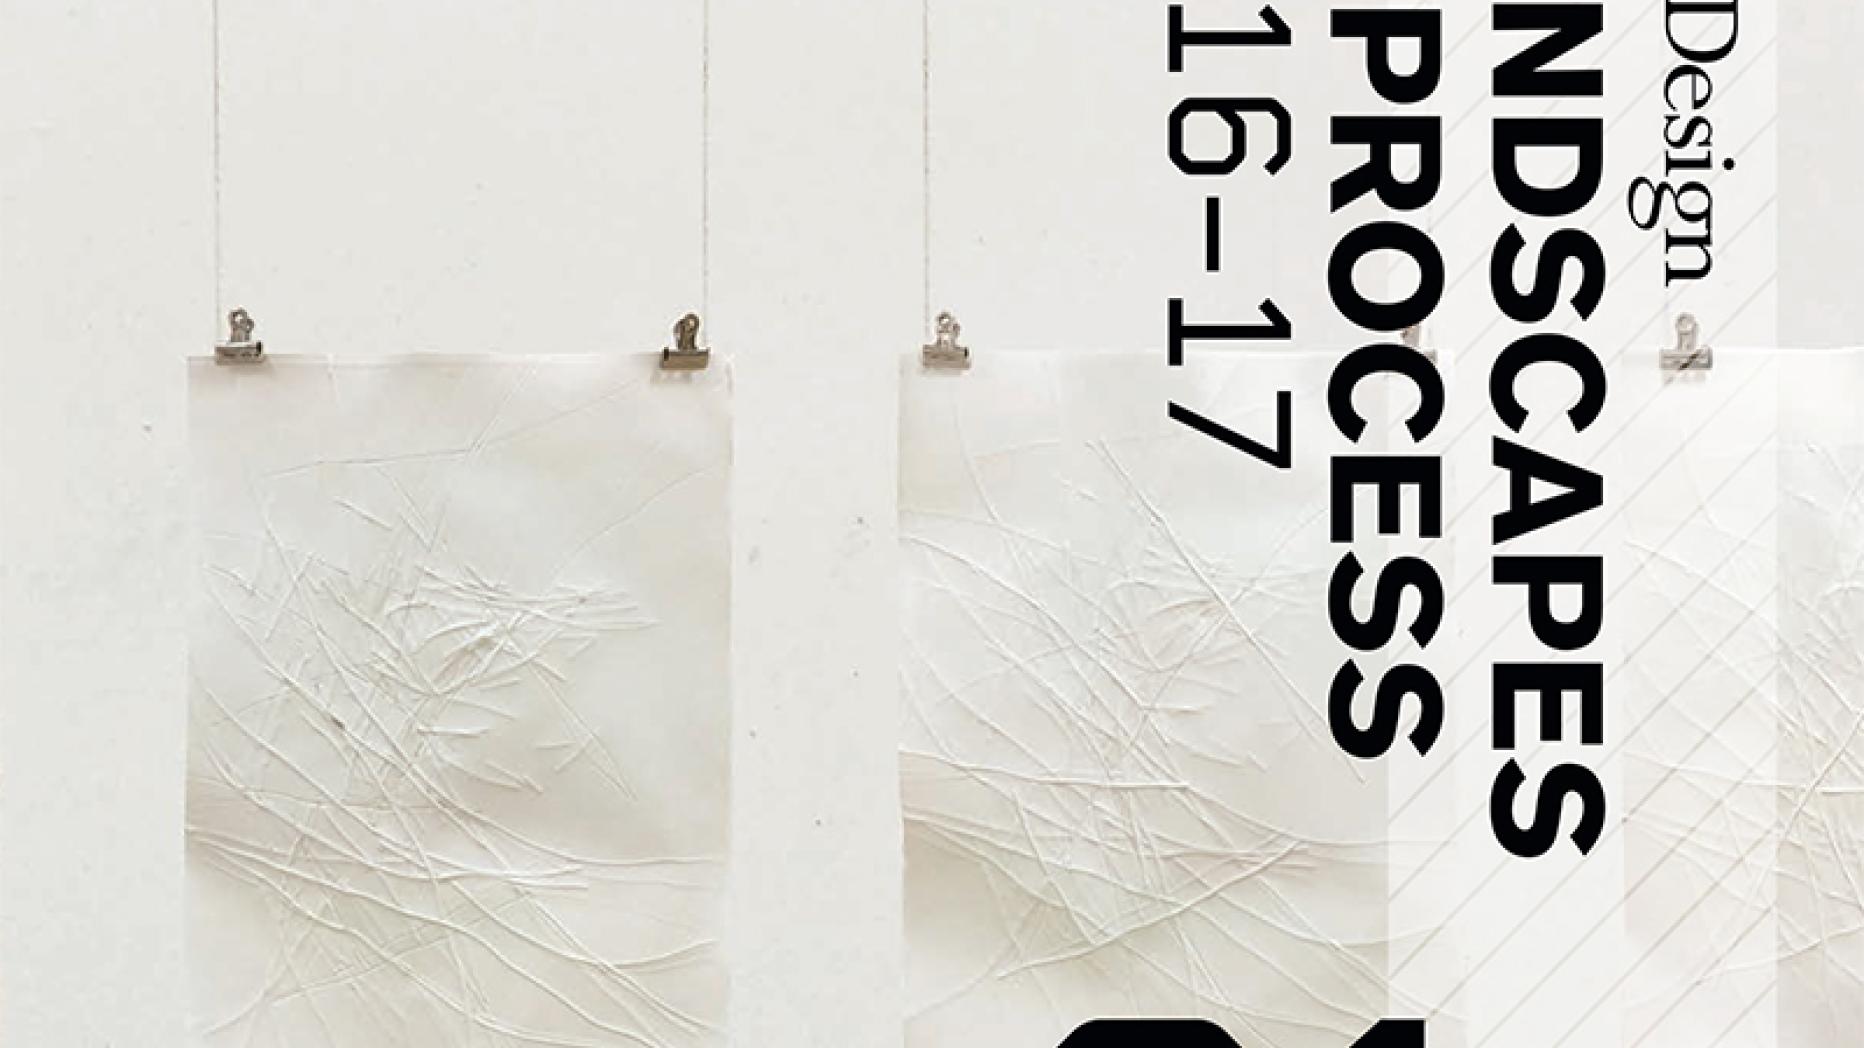 Cover for publication, "Landscapes in Process" edition 21, 2016-17